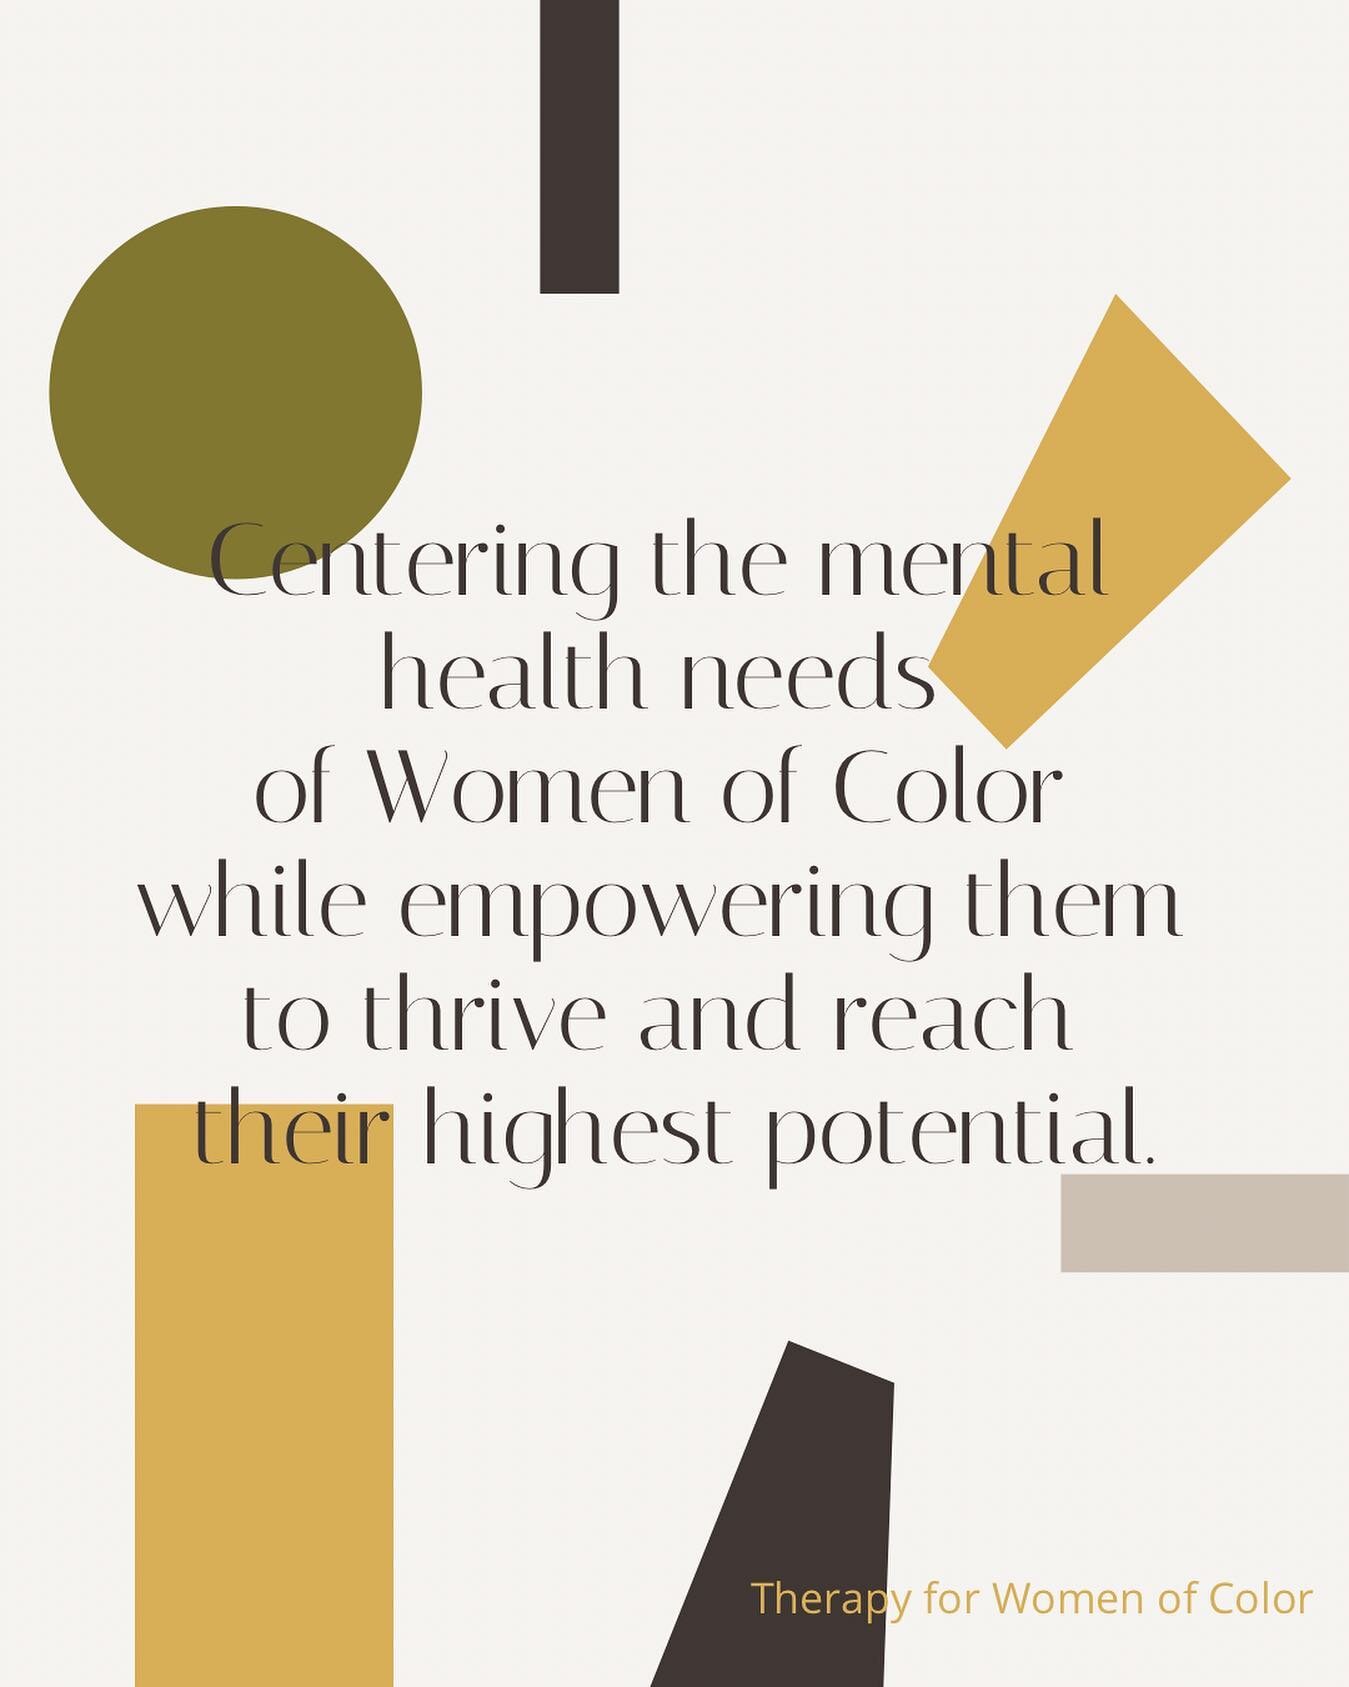 At the core, this is what Therapy for Women of Color is about. 

My aim in starting my practice was and continues to be to provide a safe space that is centered around the needs of Women of Color. I seek to celebrate the various identities of my clie